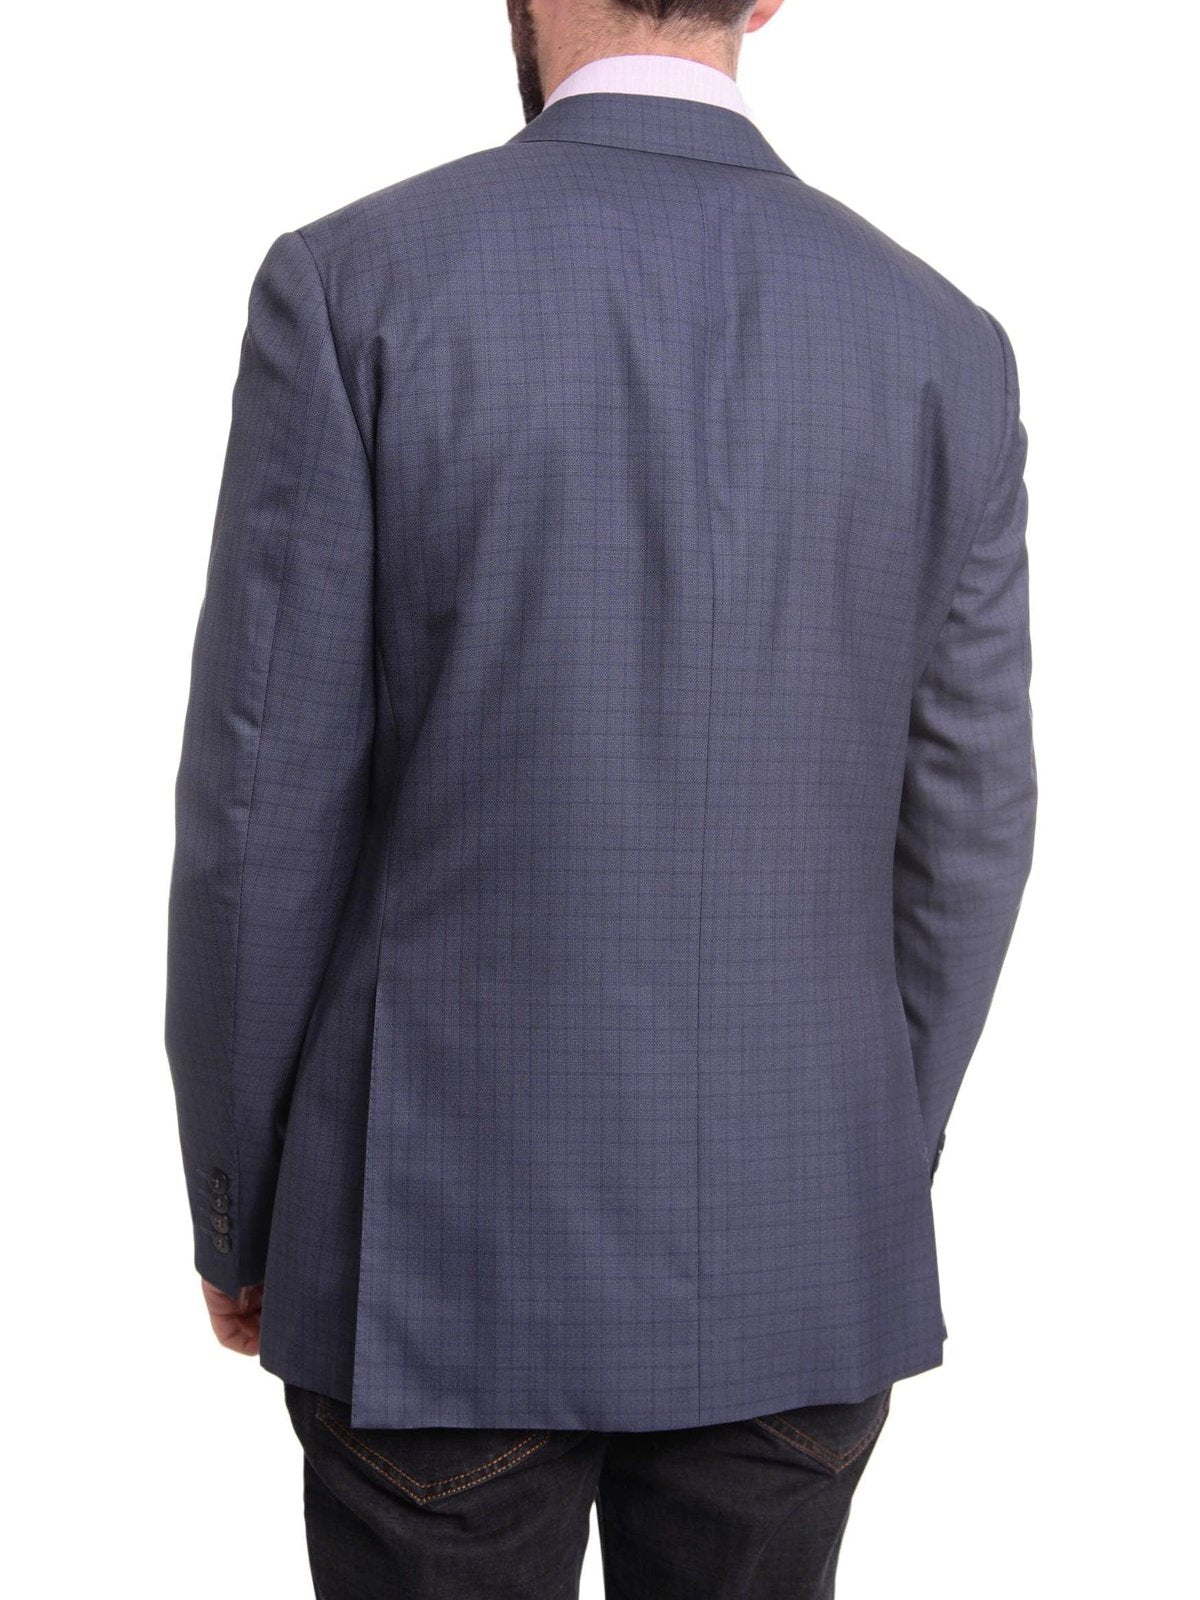 Back View of Slim Fit Navy Blue Check Half Canvassed Zegna Wool Blazer